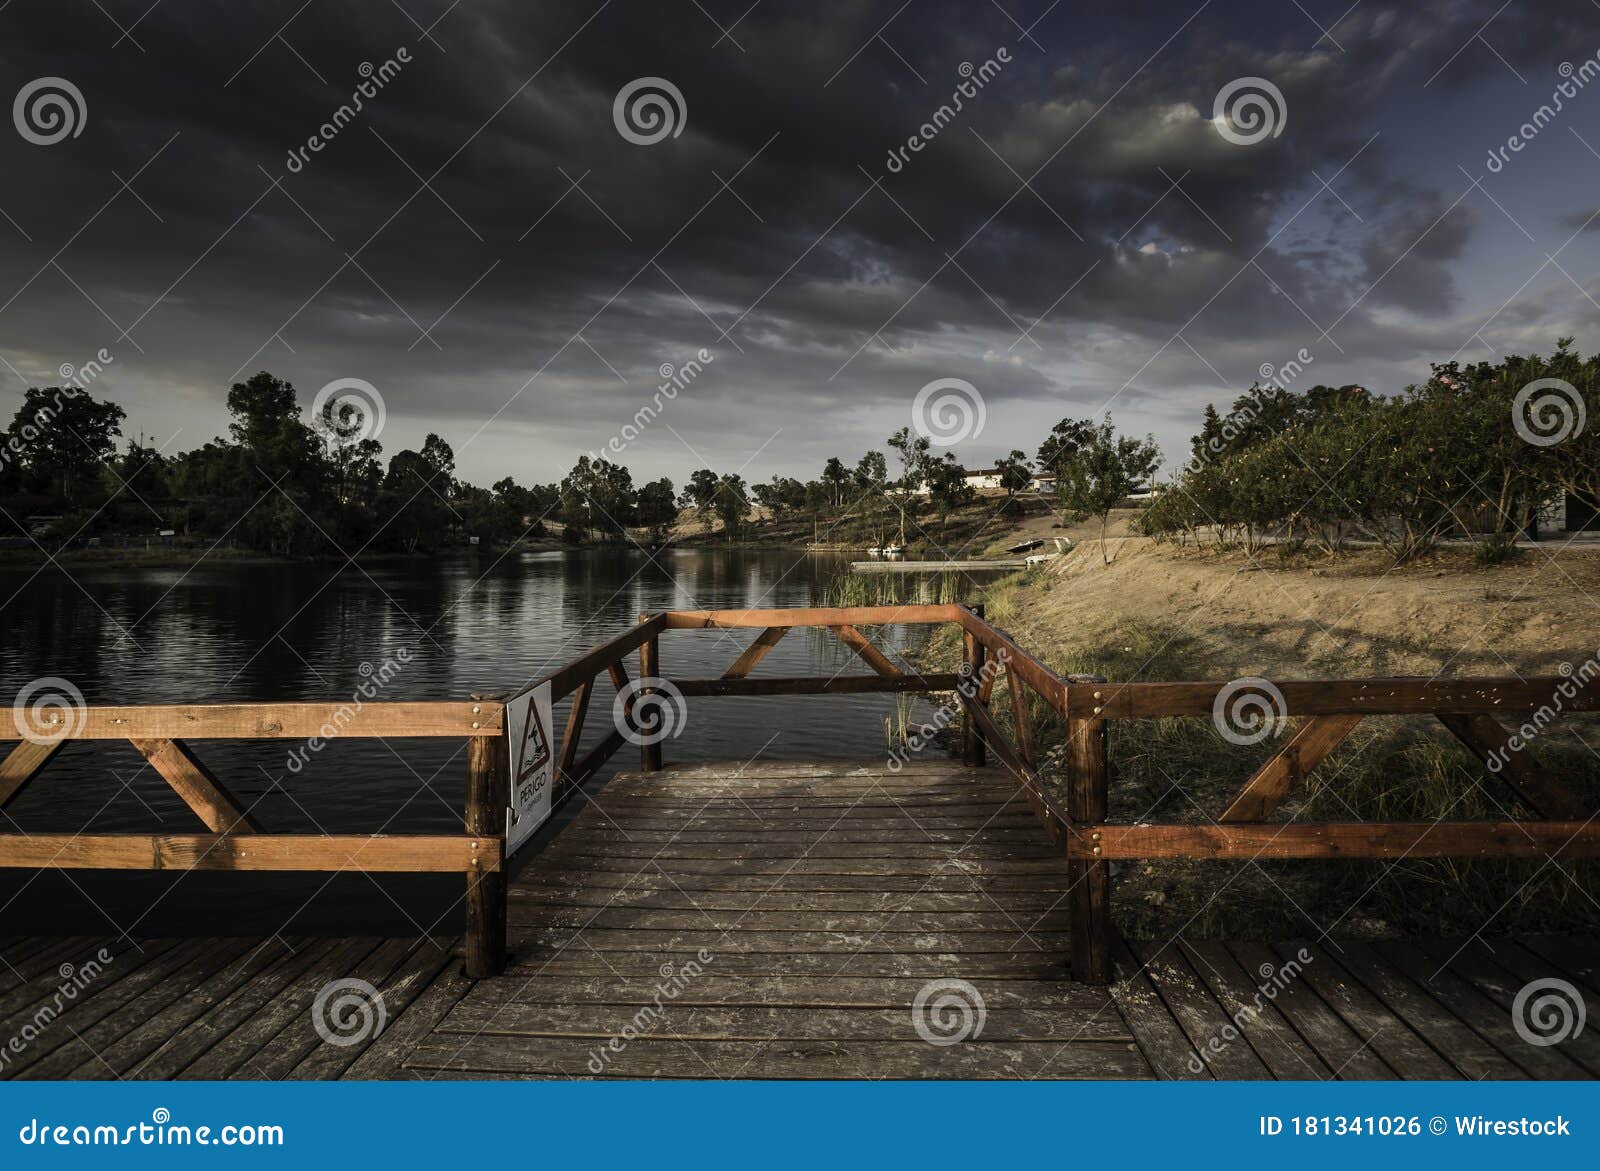 wooden dock with a [perigo - danger] sign on a lake under a dark cloudy sky in the evening